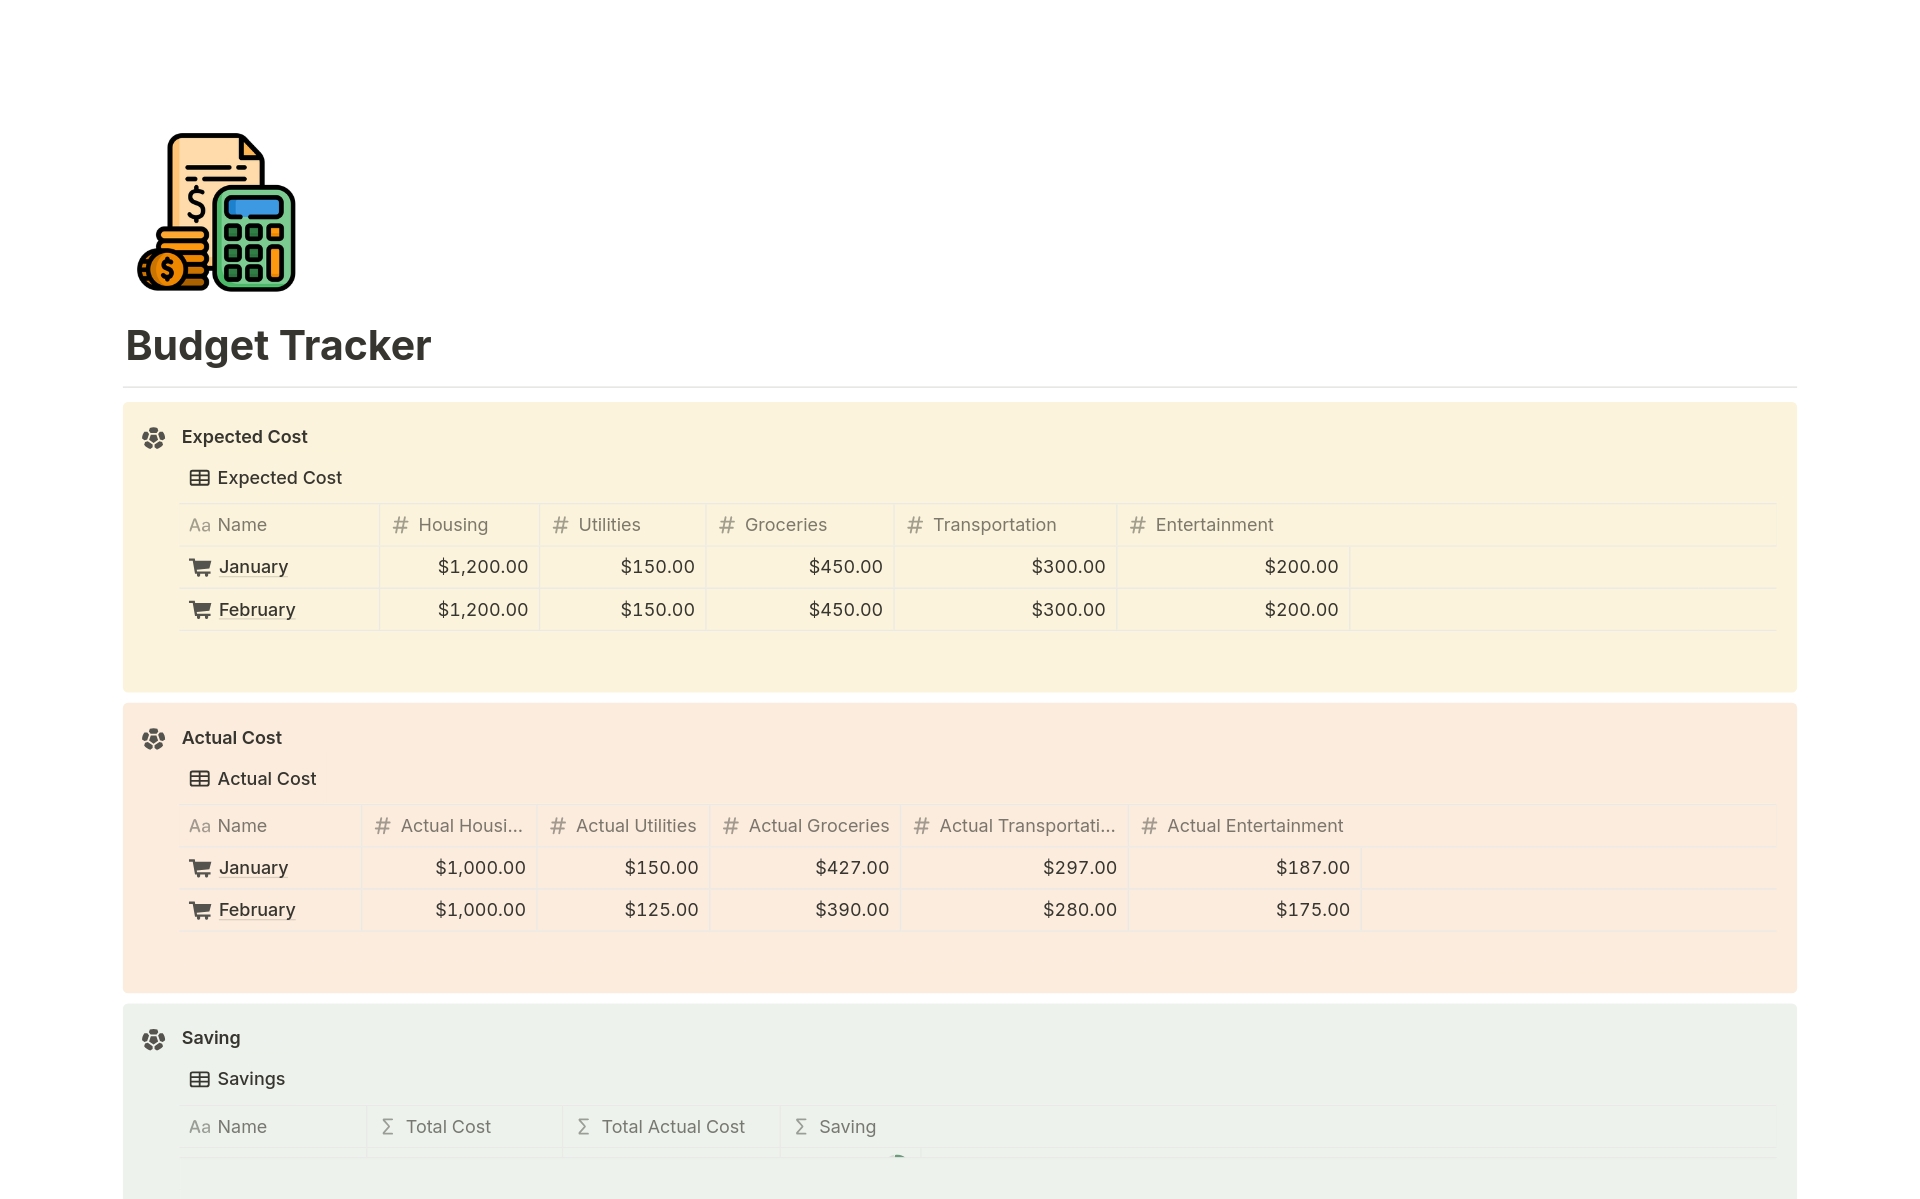 Budget Tracker Template helps you to Track your expenses.